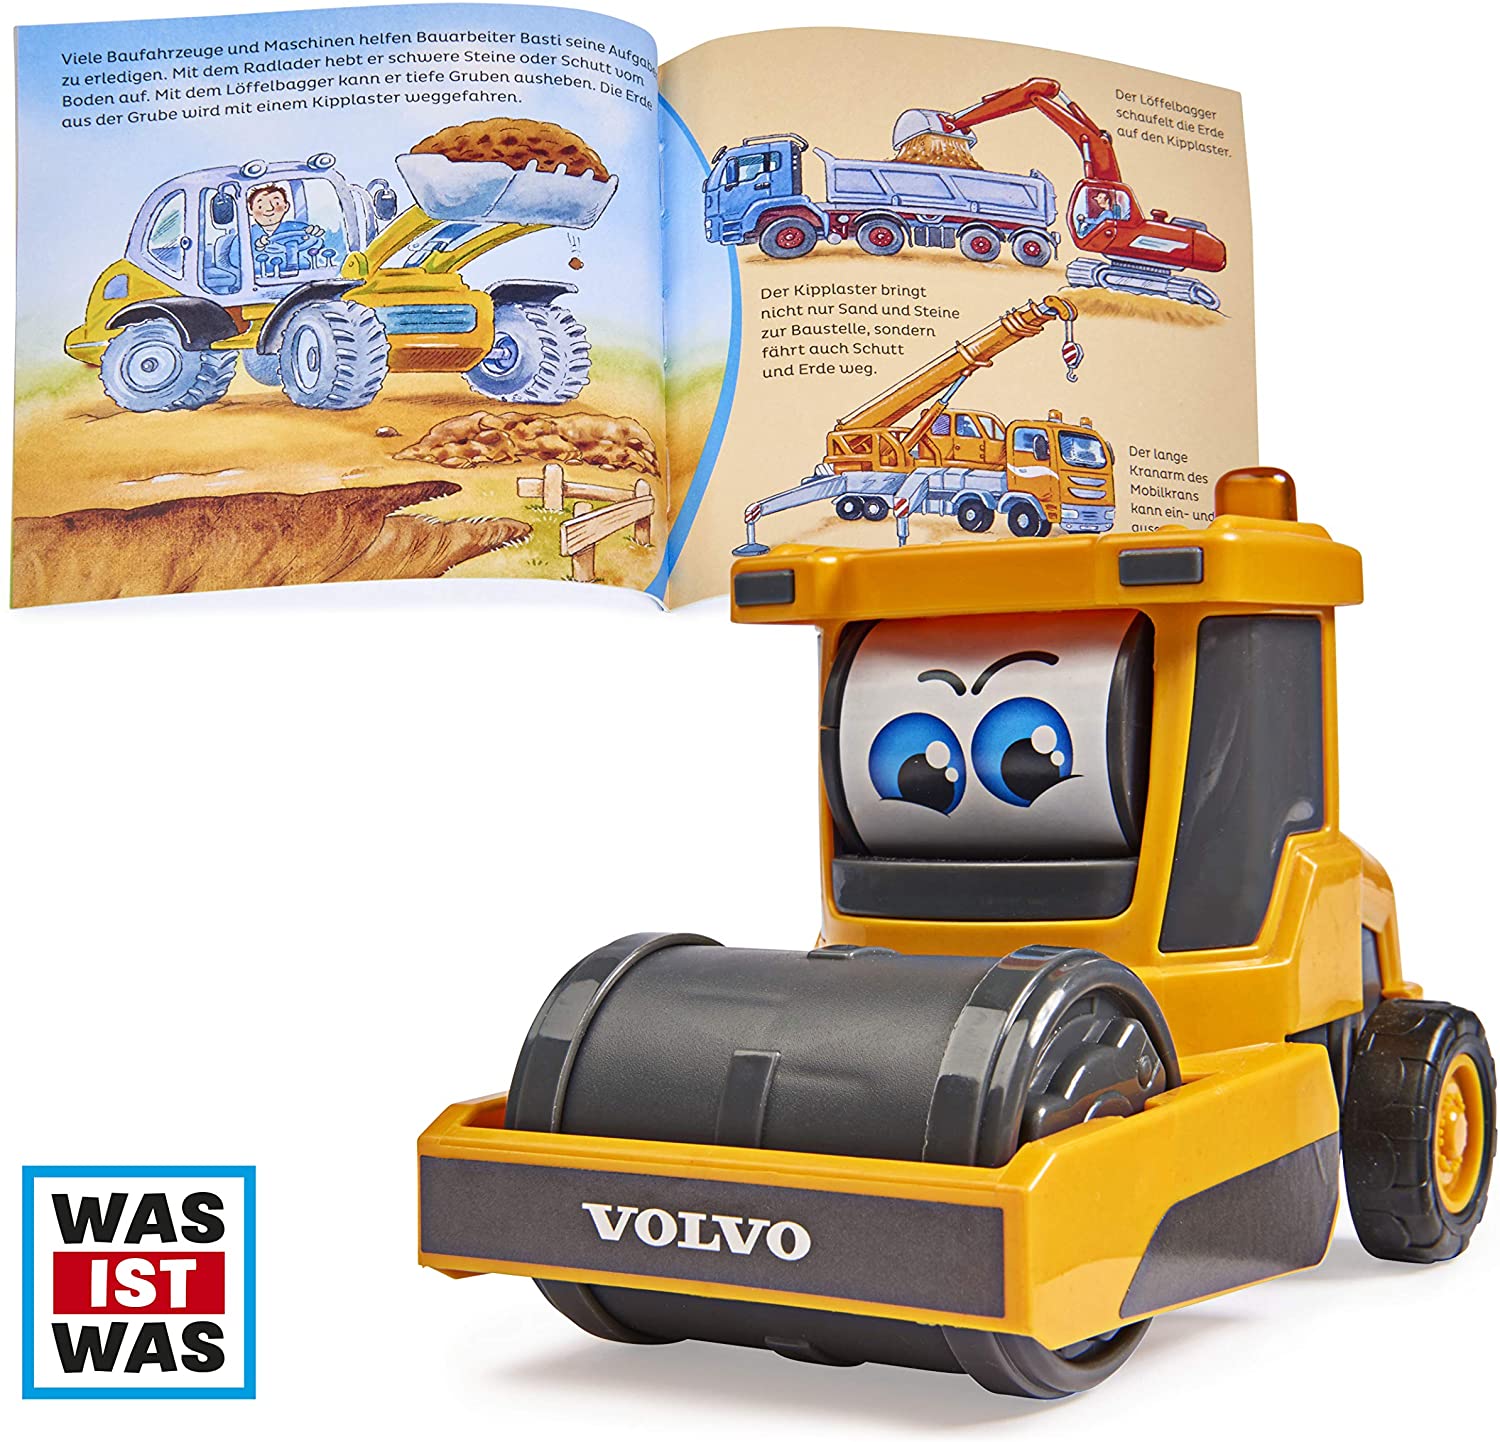 Dickie Toys What Is What Construction Site, Volvo Roller With Freewheel, Sp